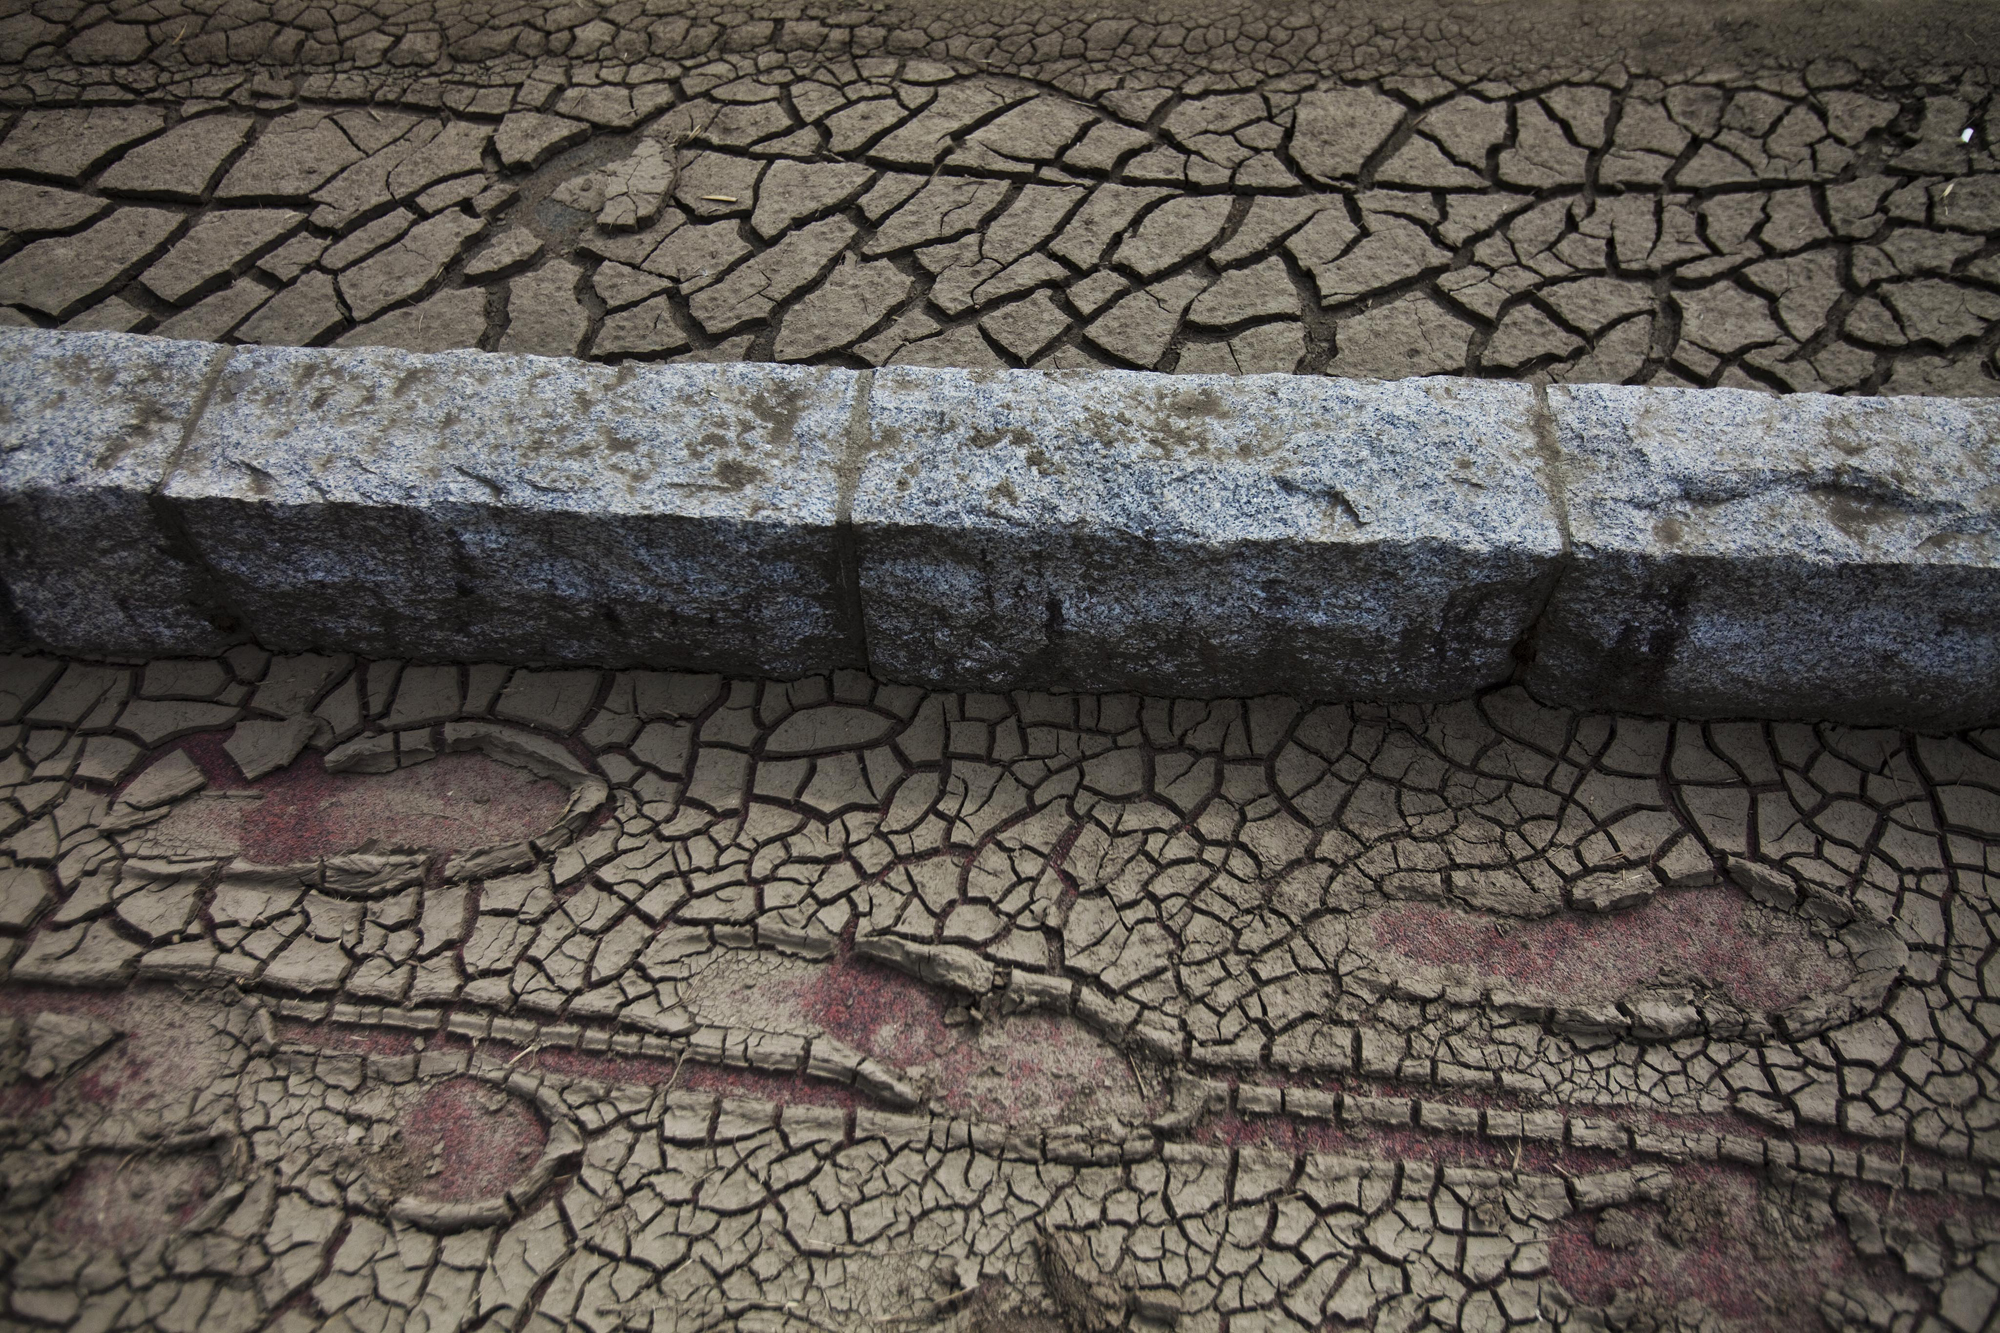 Footprints are left in the dried mud of a street of the Odaka area of Minamisoma, inside the deserted evacuation zone established for the 20 kilometer radius around the Fukushima Dai-ichi nuclear reactors, April 7, 2011.